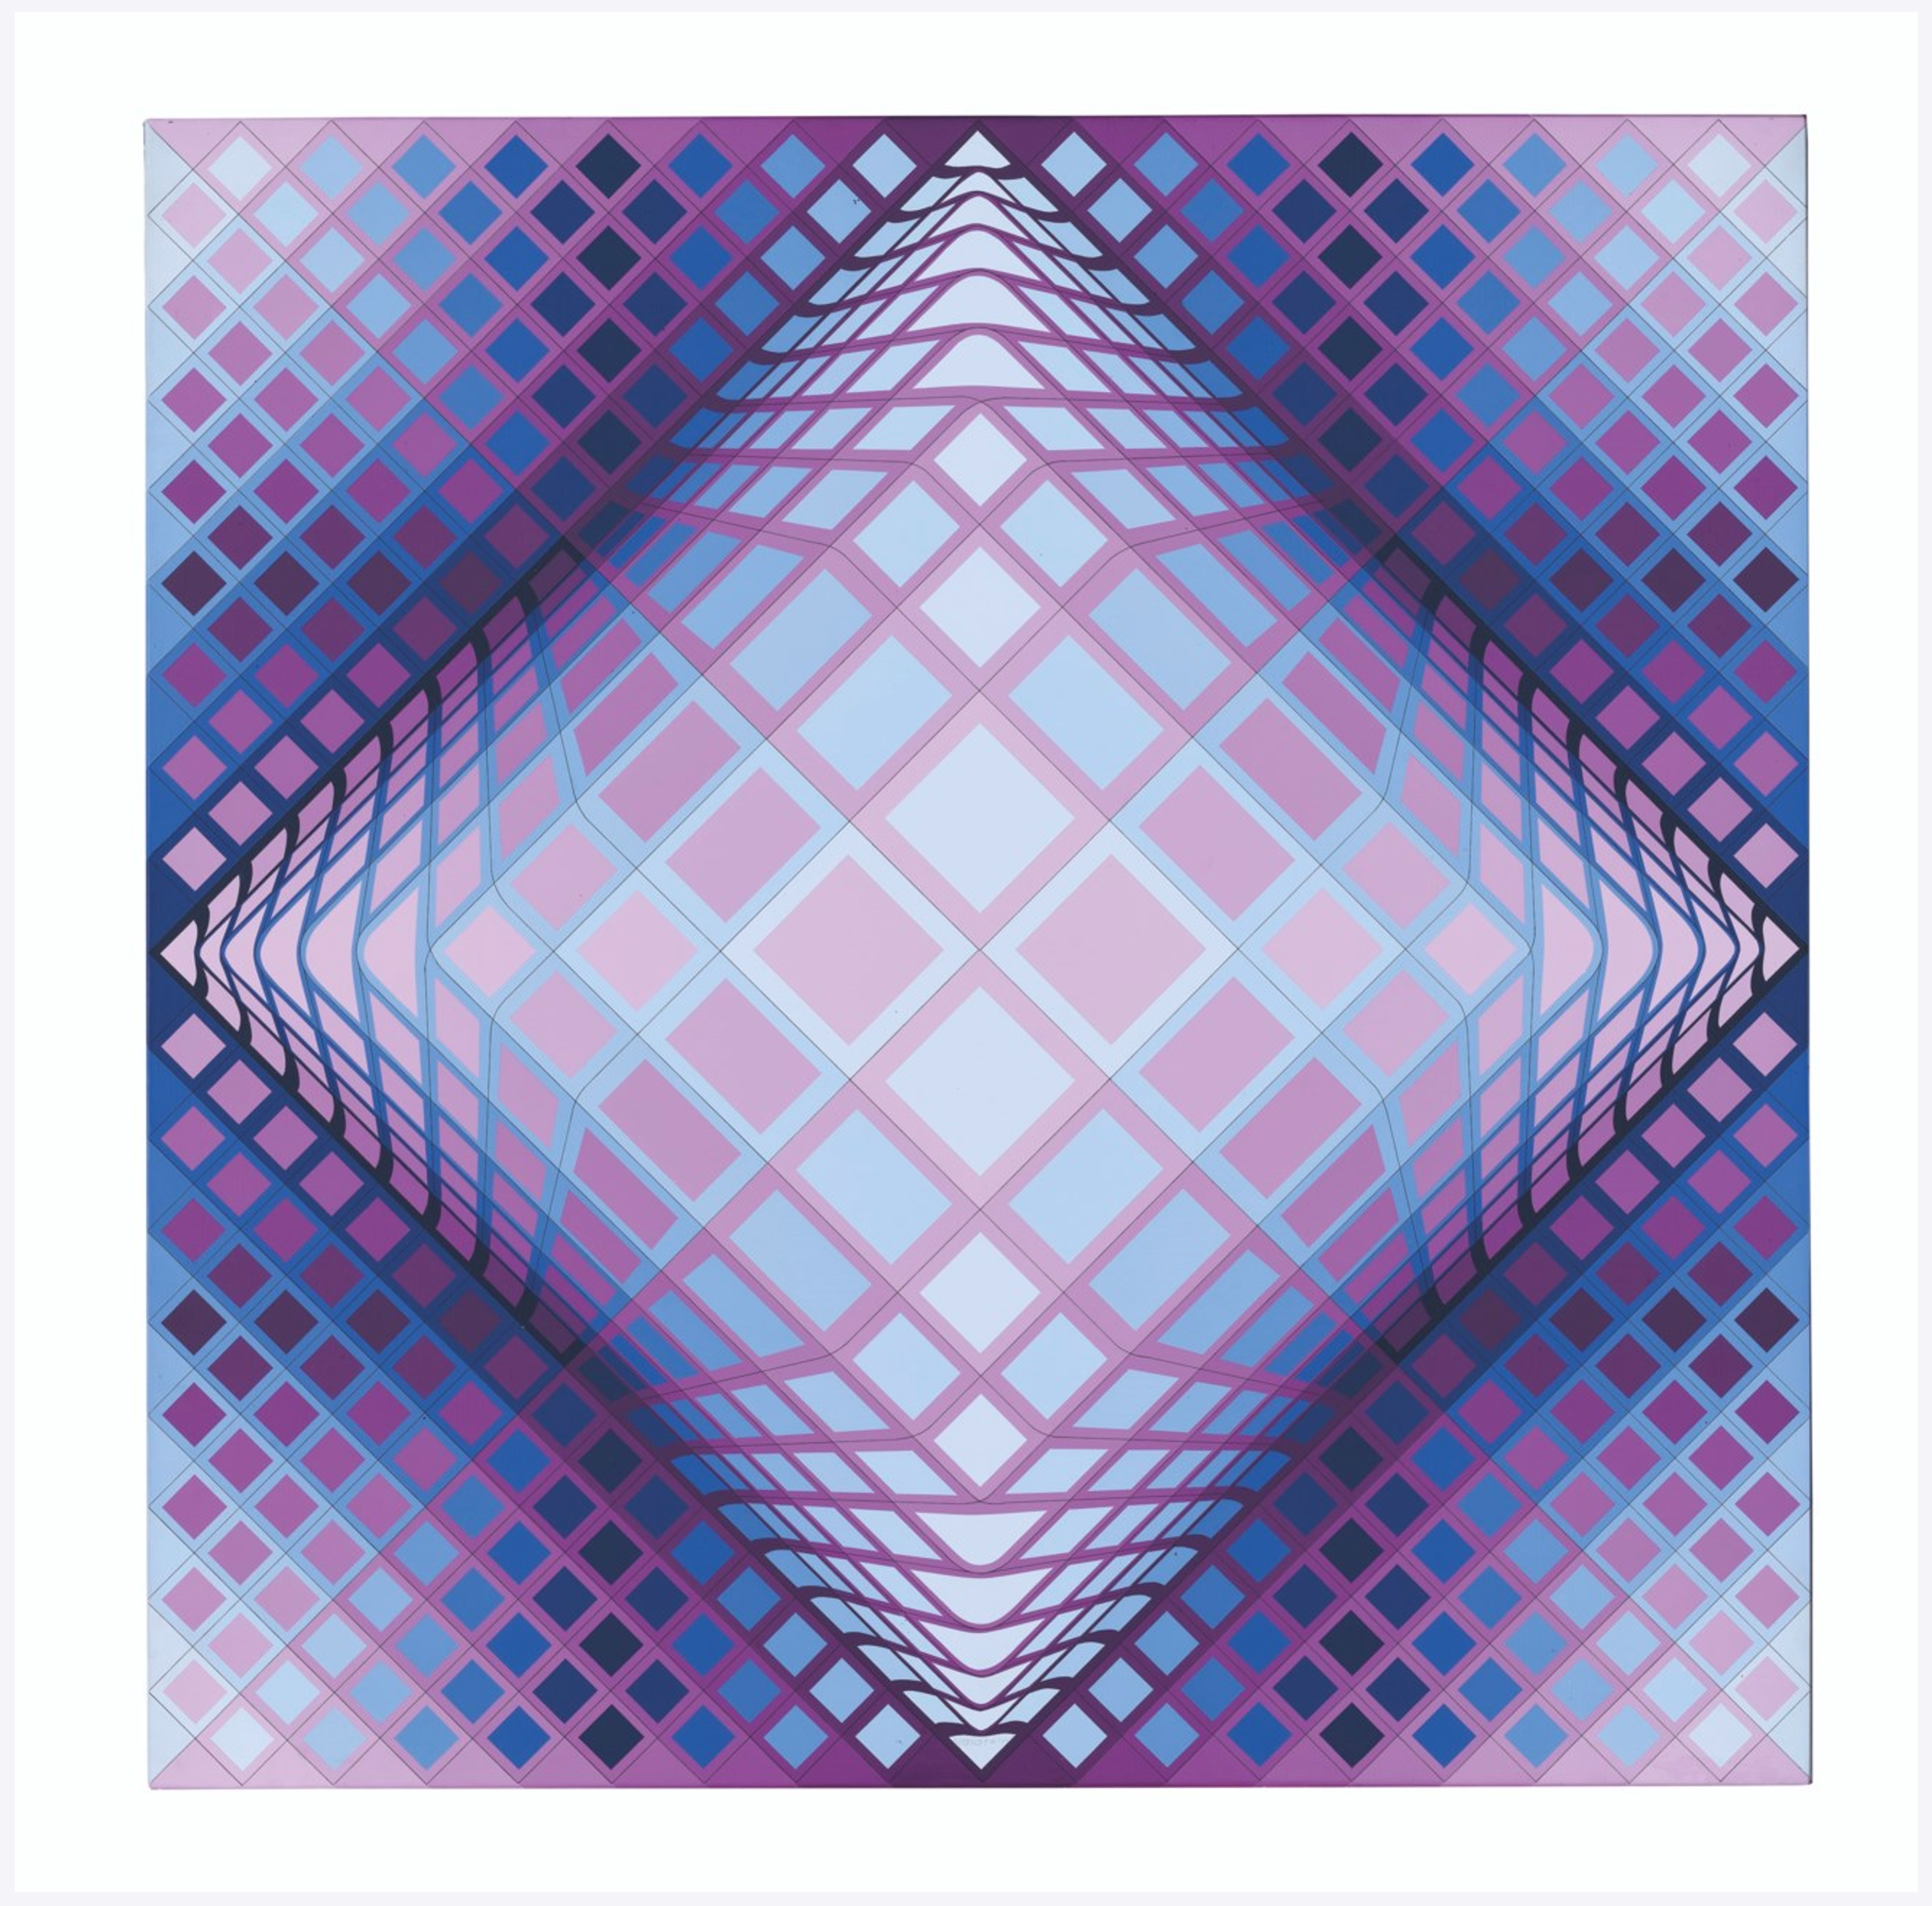 a square optical illusion artwork composed of diamond shapes in varying hiues of purple and blue that forms a large diamond in the centre.